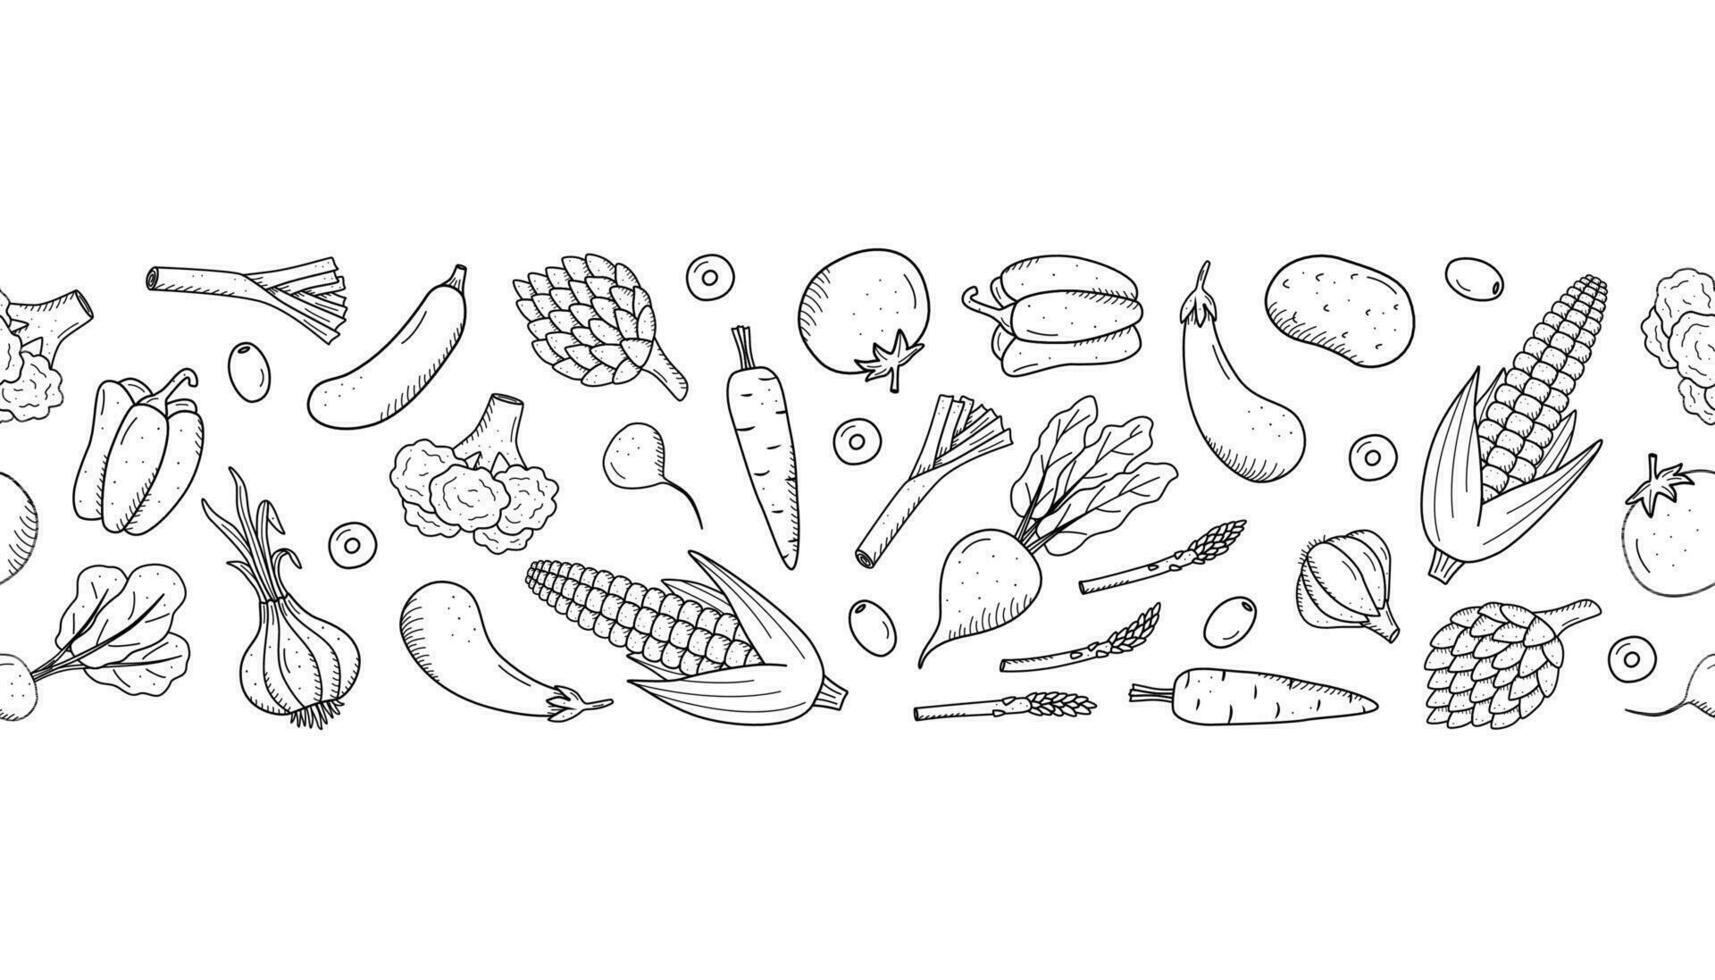 Seamless Pattern of drawing vegetables in doodle style. A set of vector illustrations of the harvest corn potatoes carrots radishes beets garlic onions tomatoes, etc.